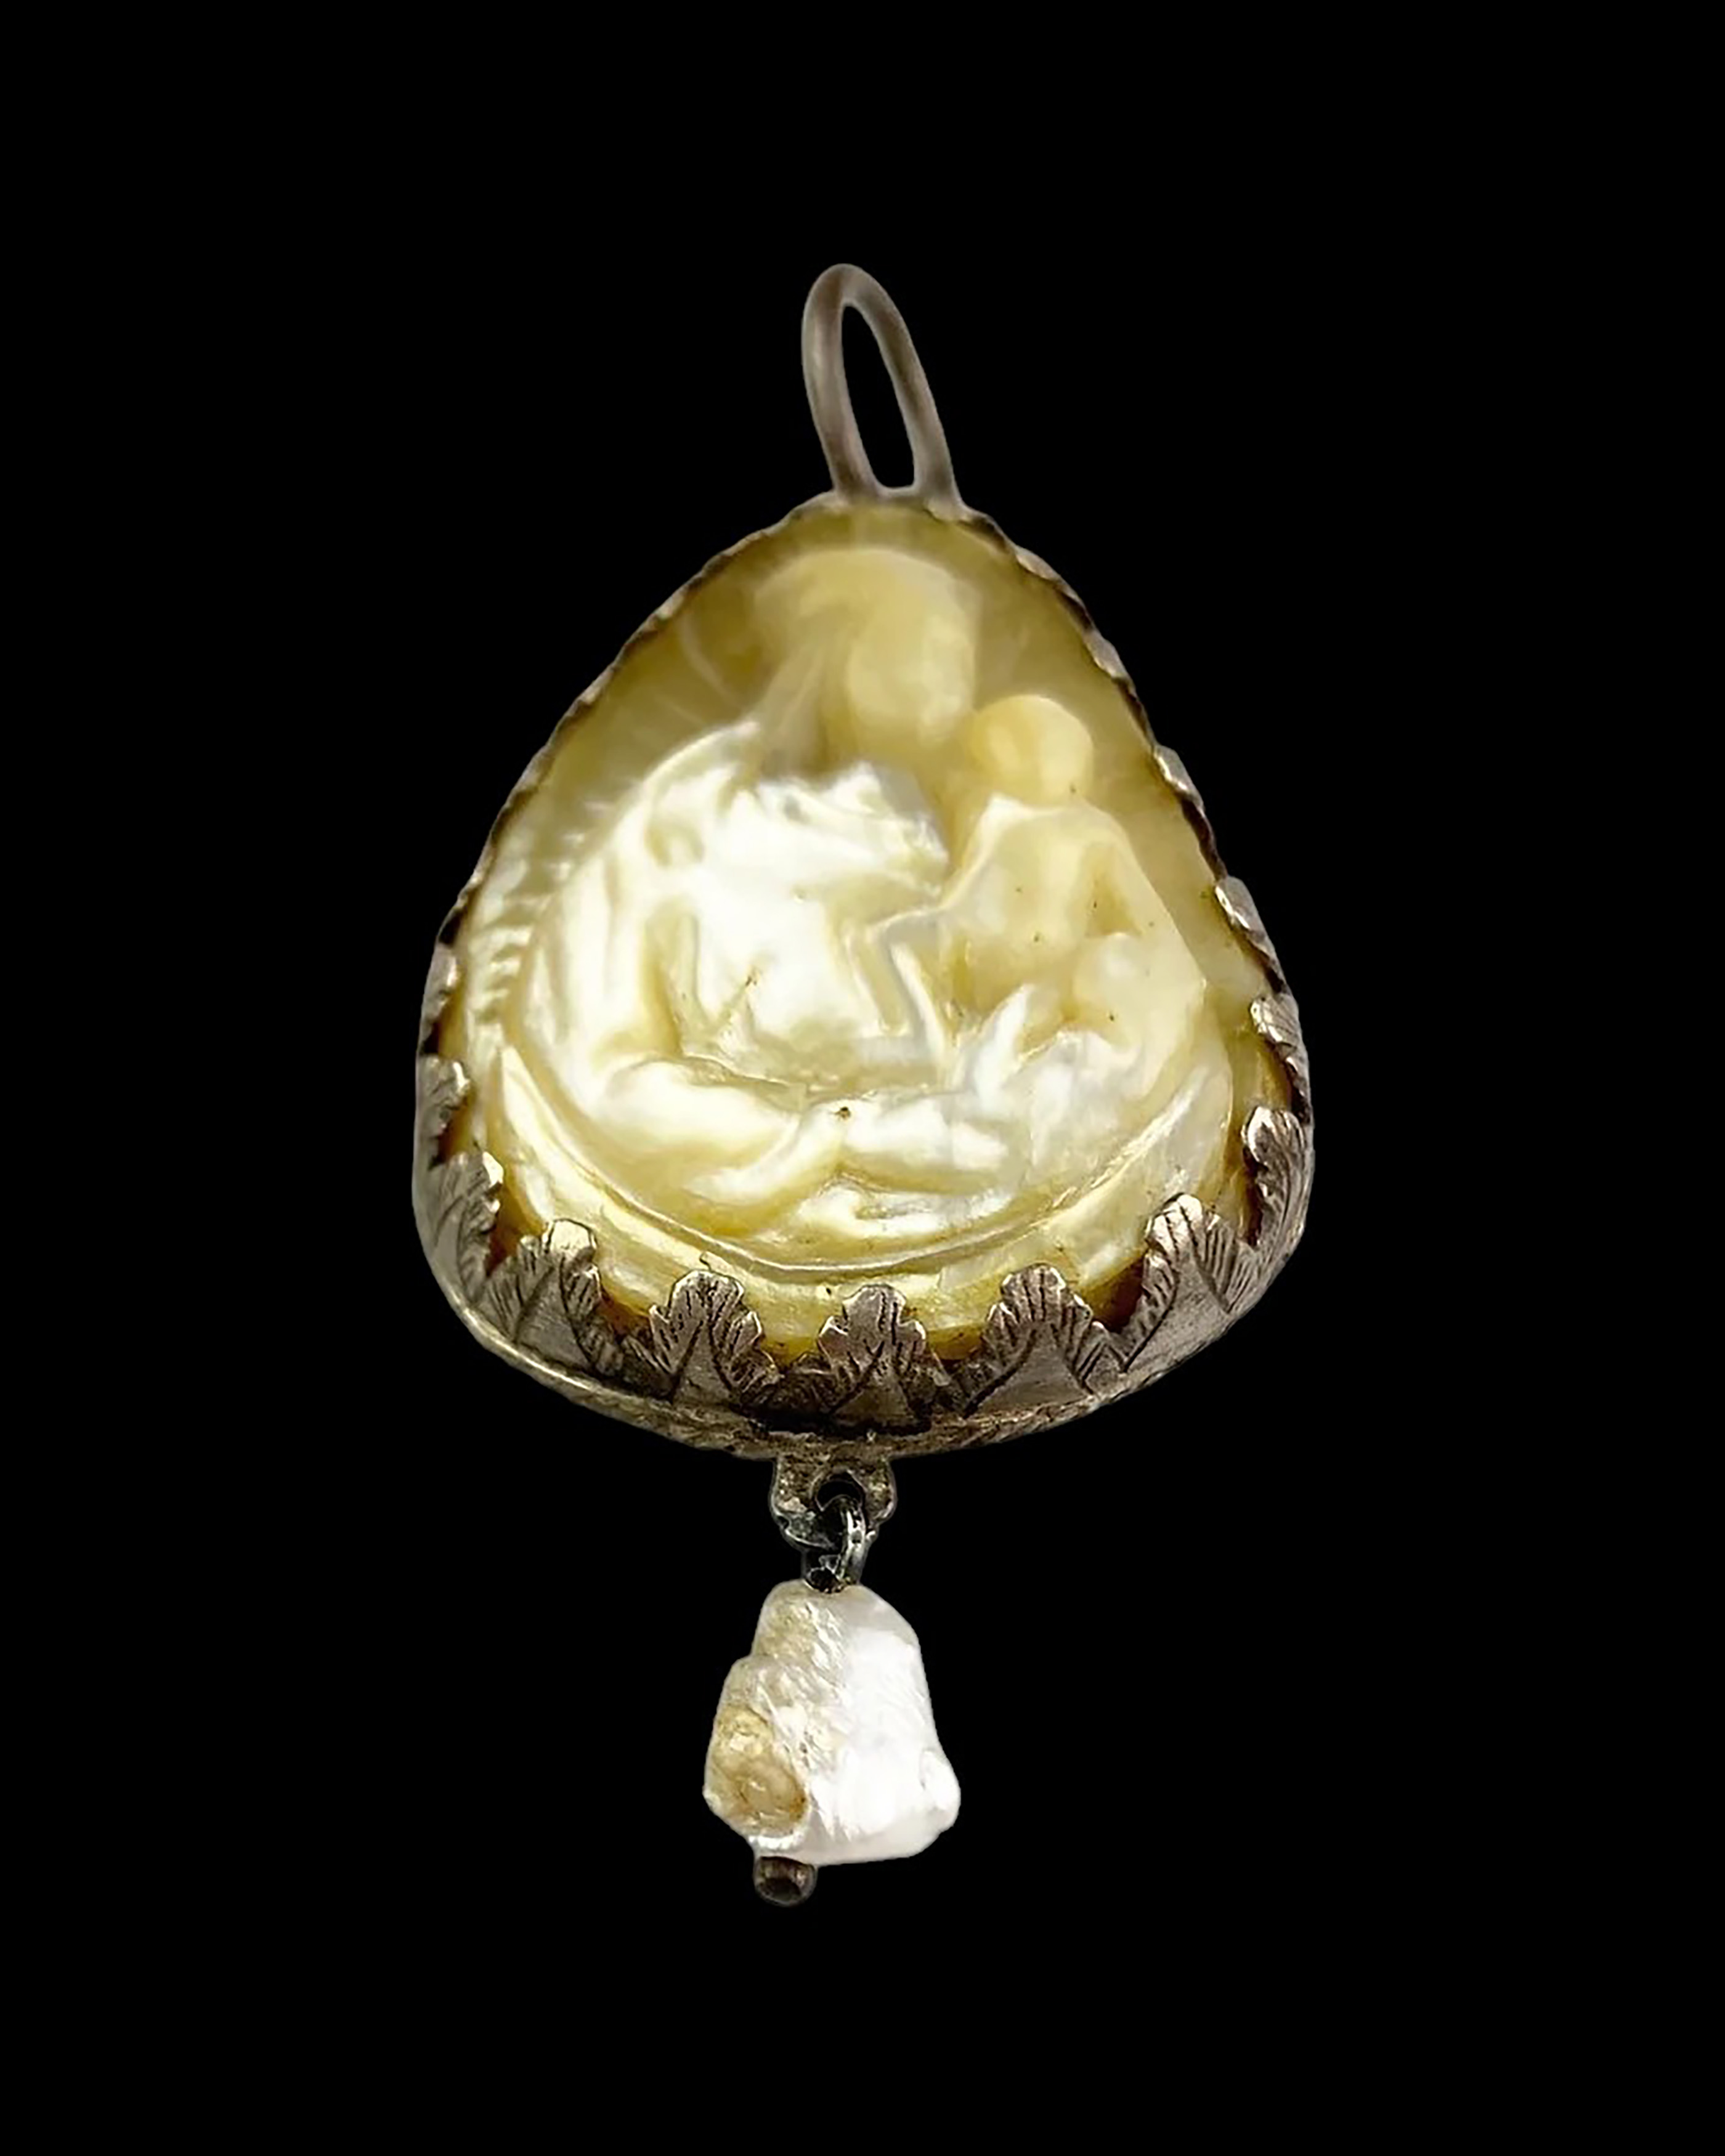 Mother-of-pearl cameo pendant of the Virgin and Child. German, 15th century. - Image 3 of 6